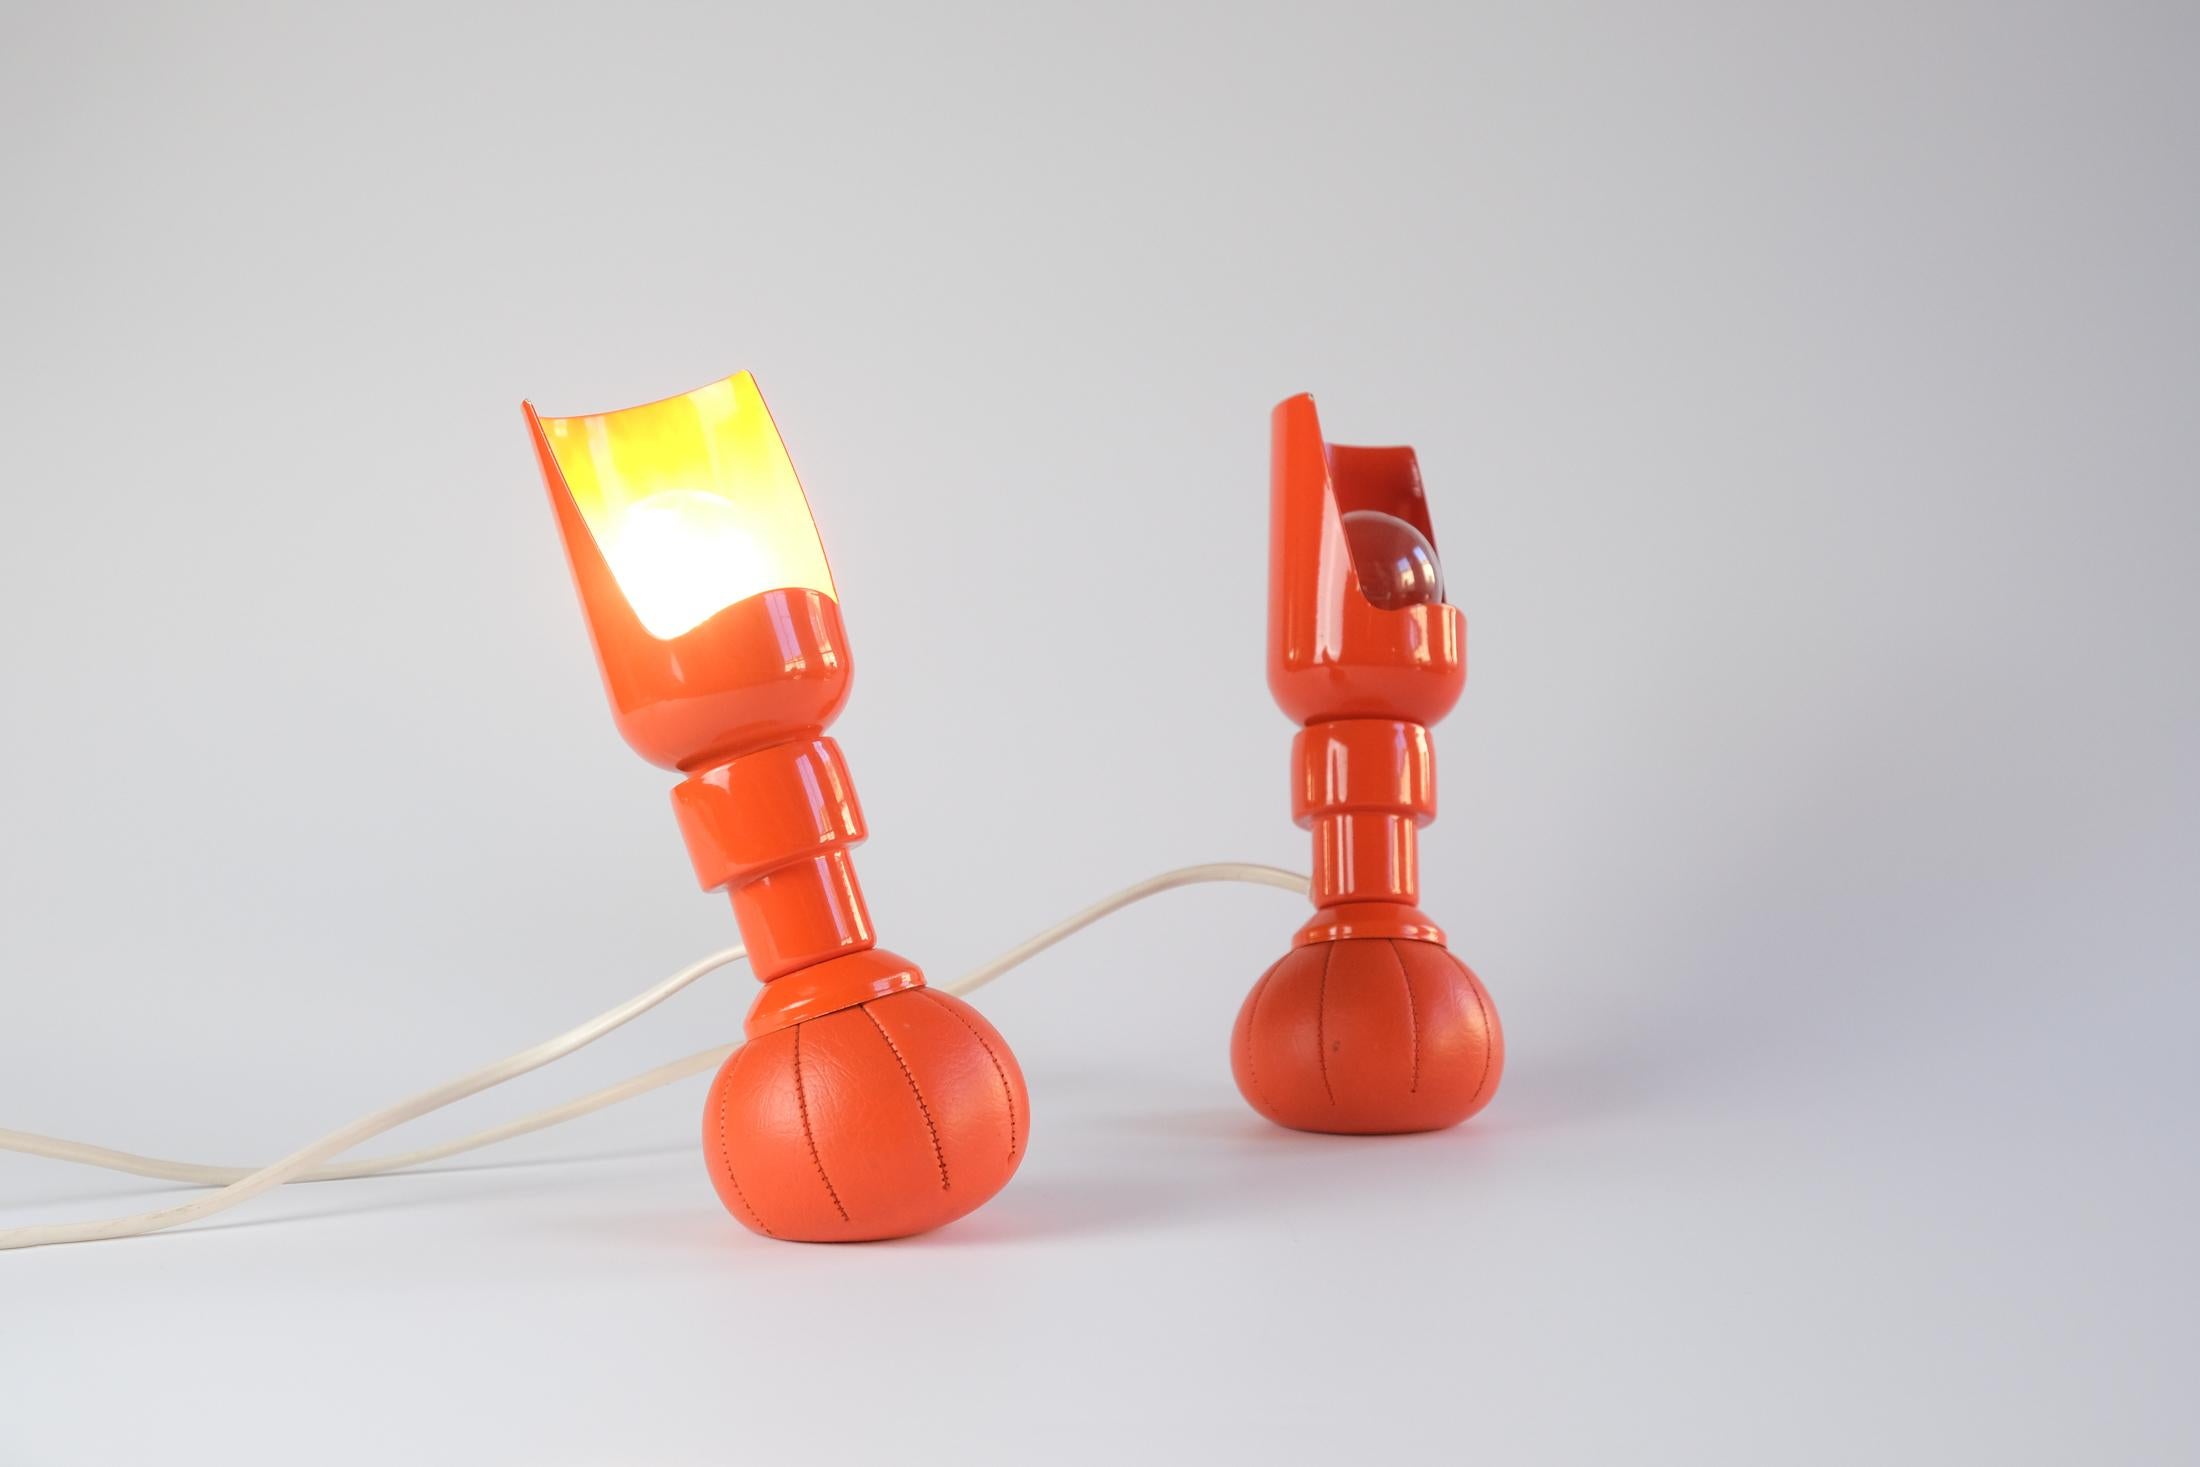 Rare Pair of Mid-Century Gino Sarfatti Model 600P Lamps for Arteluce, Italy 1966 For Sale 7